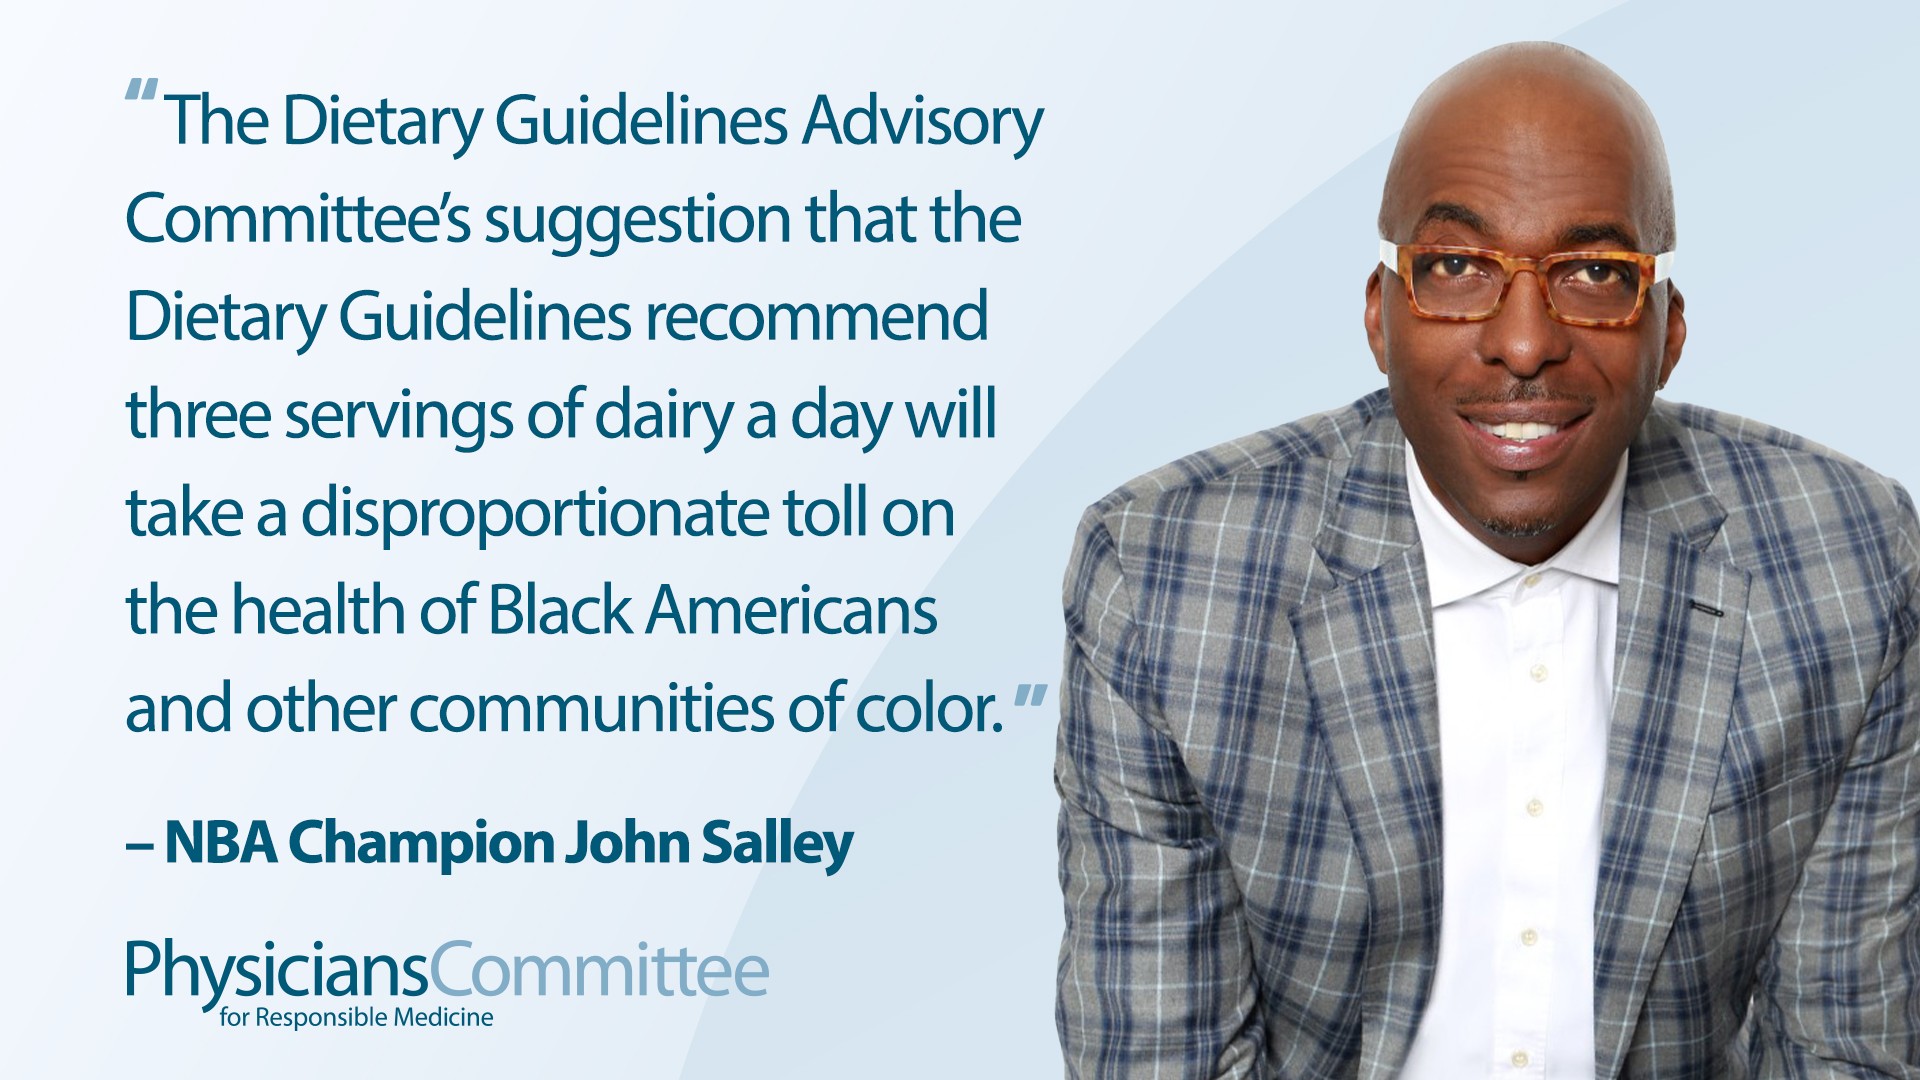 NBA Champion John Salley Joins Hundreds of Health Care Providers Calling for End to Racial Bias in Dietary Guidelines